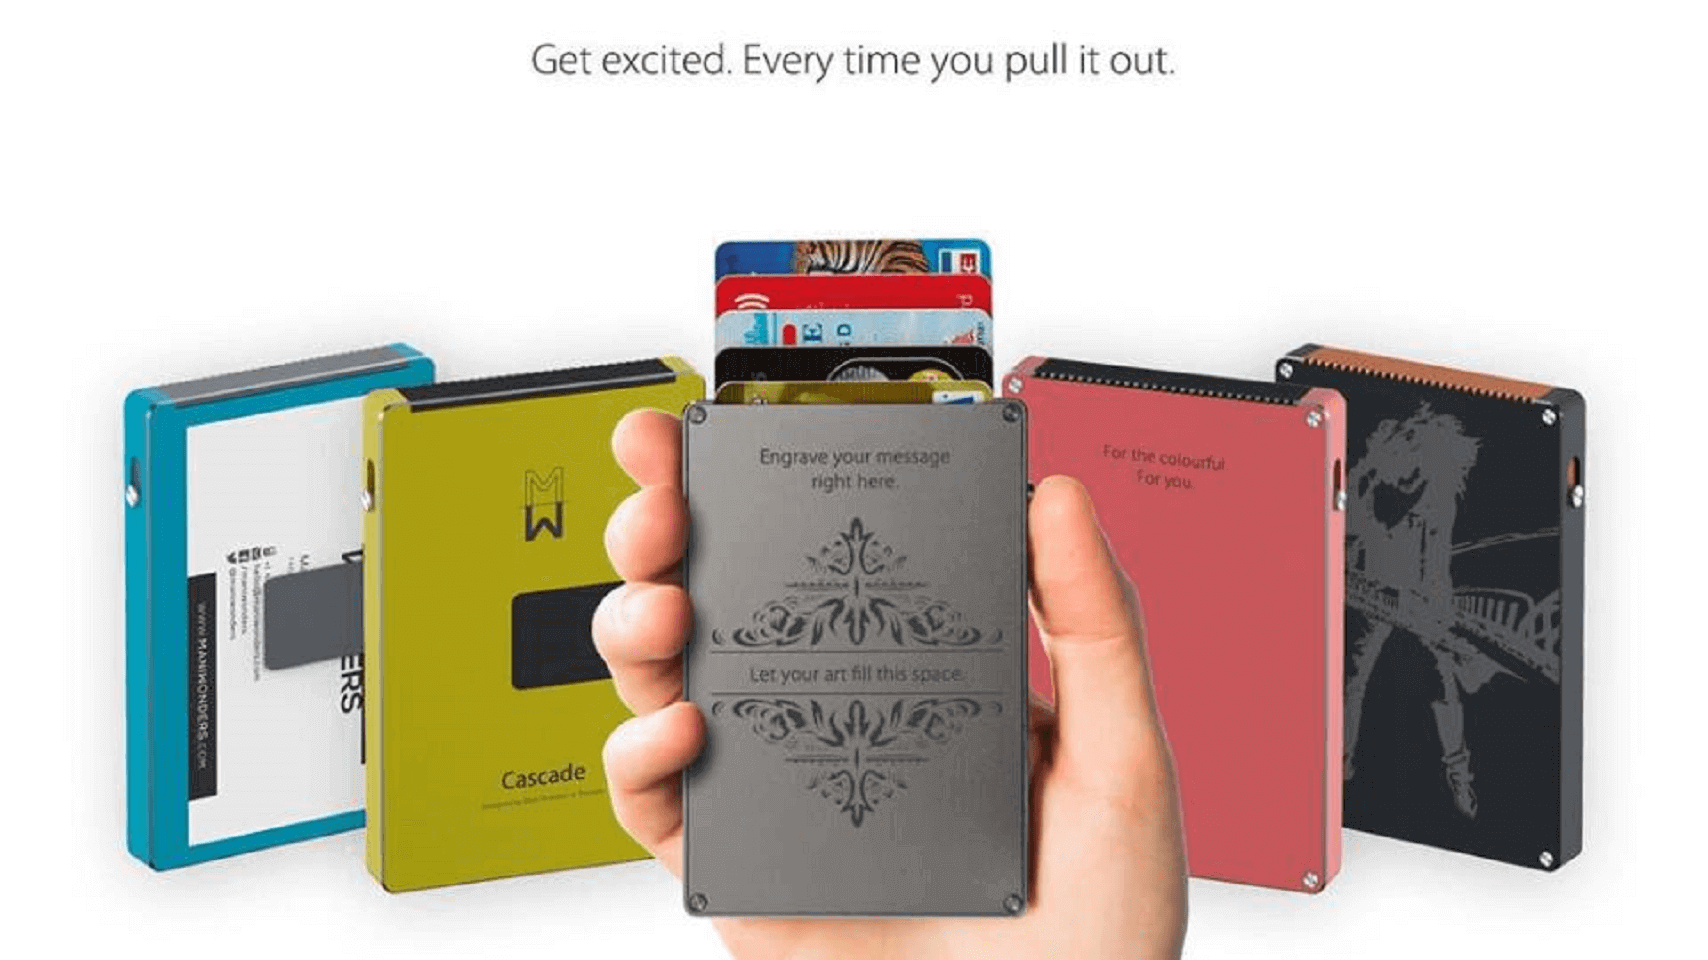 yesky-cascade-wallet-colors